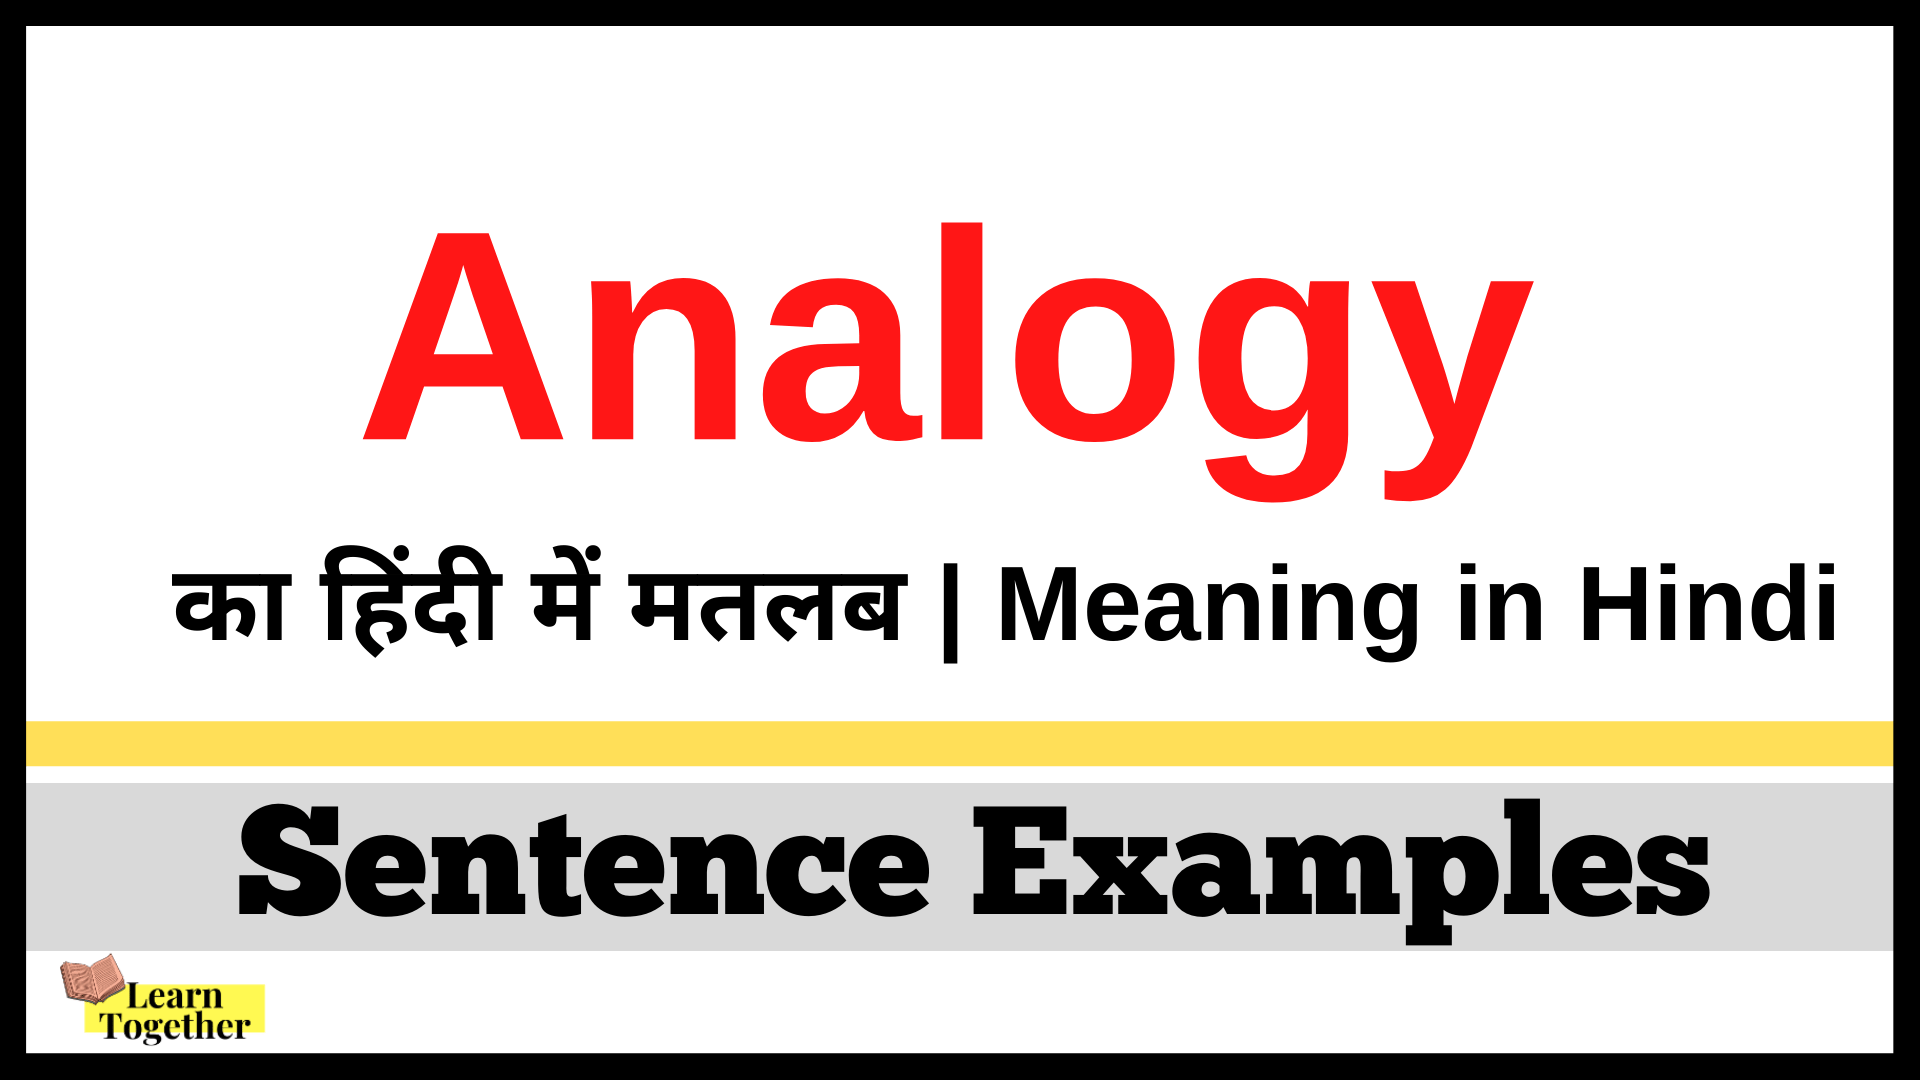 Analogy Meaning in Hindi.png